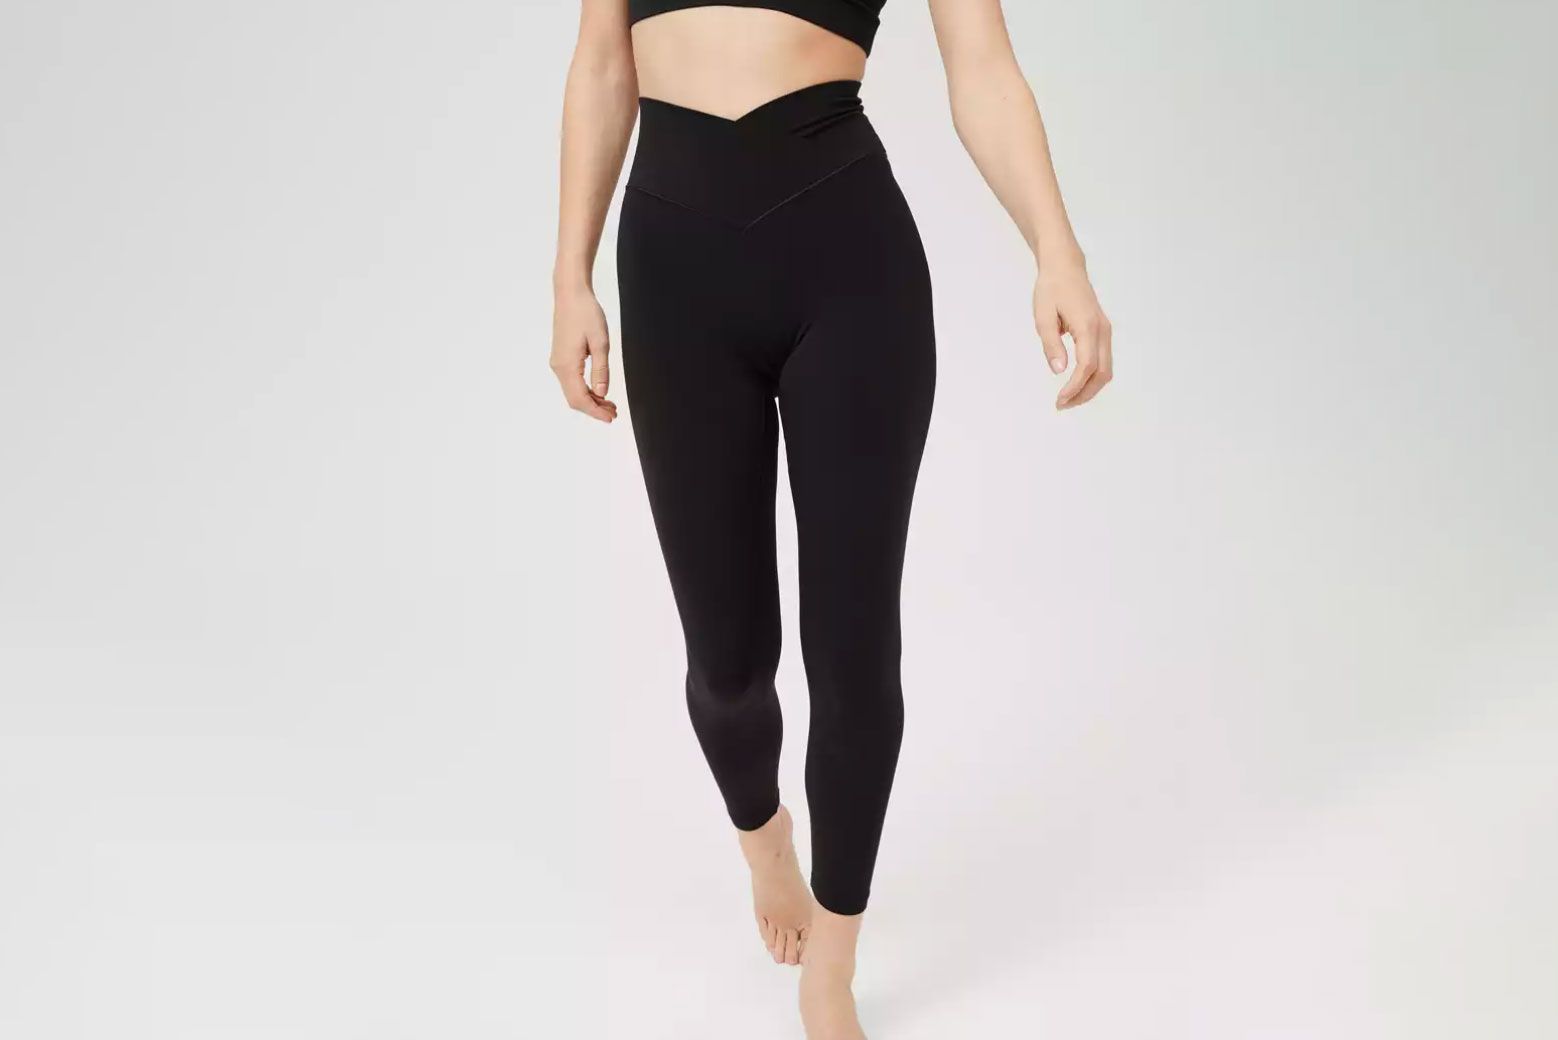 Snatched Waist Leggings